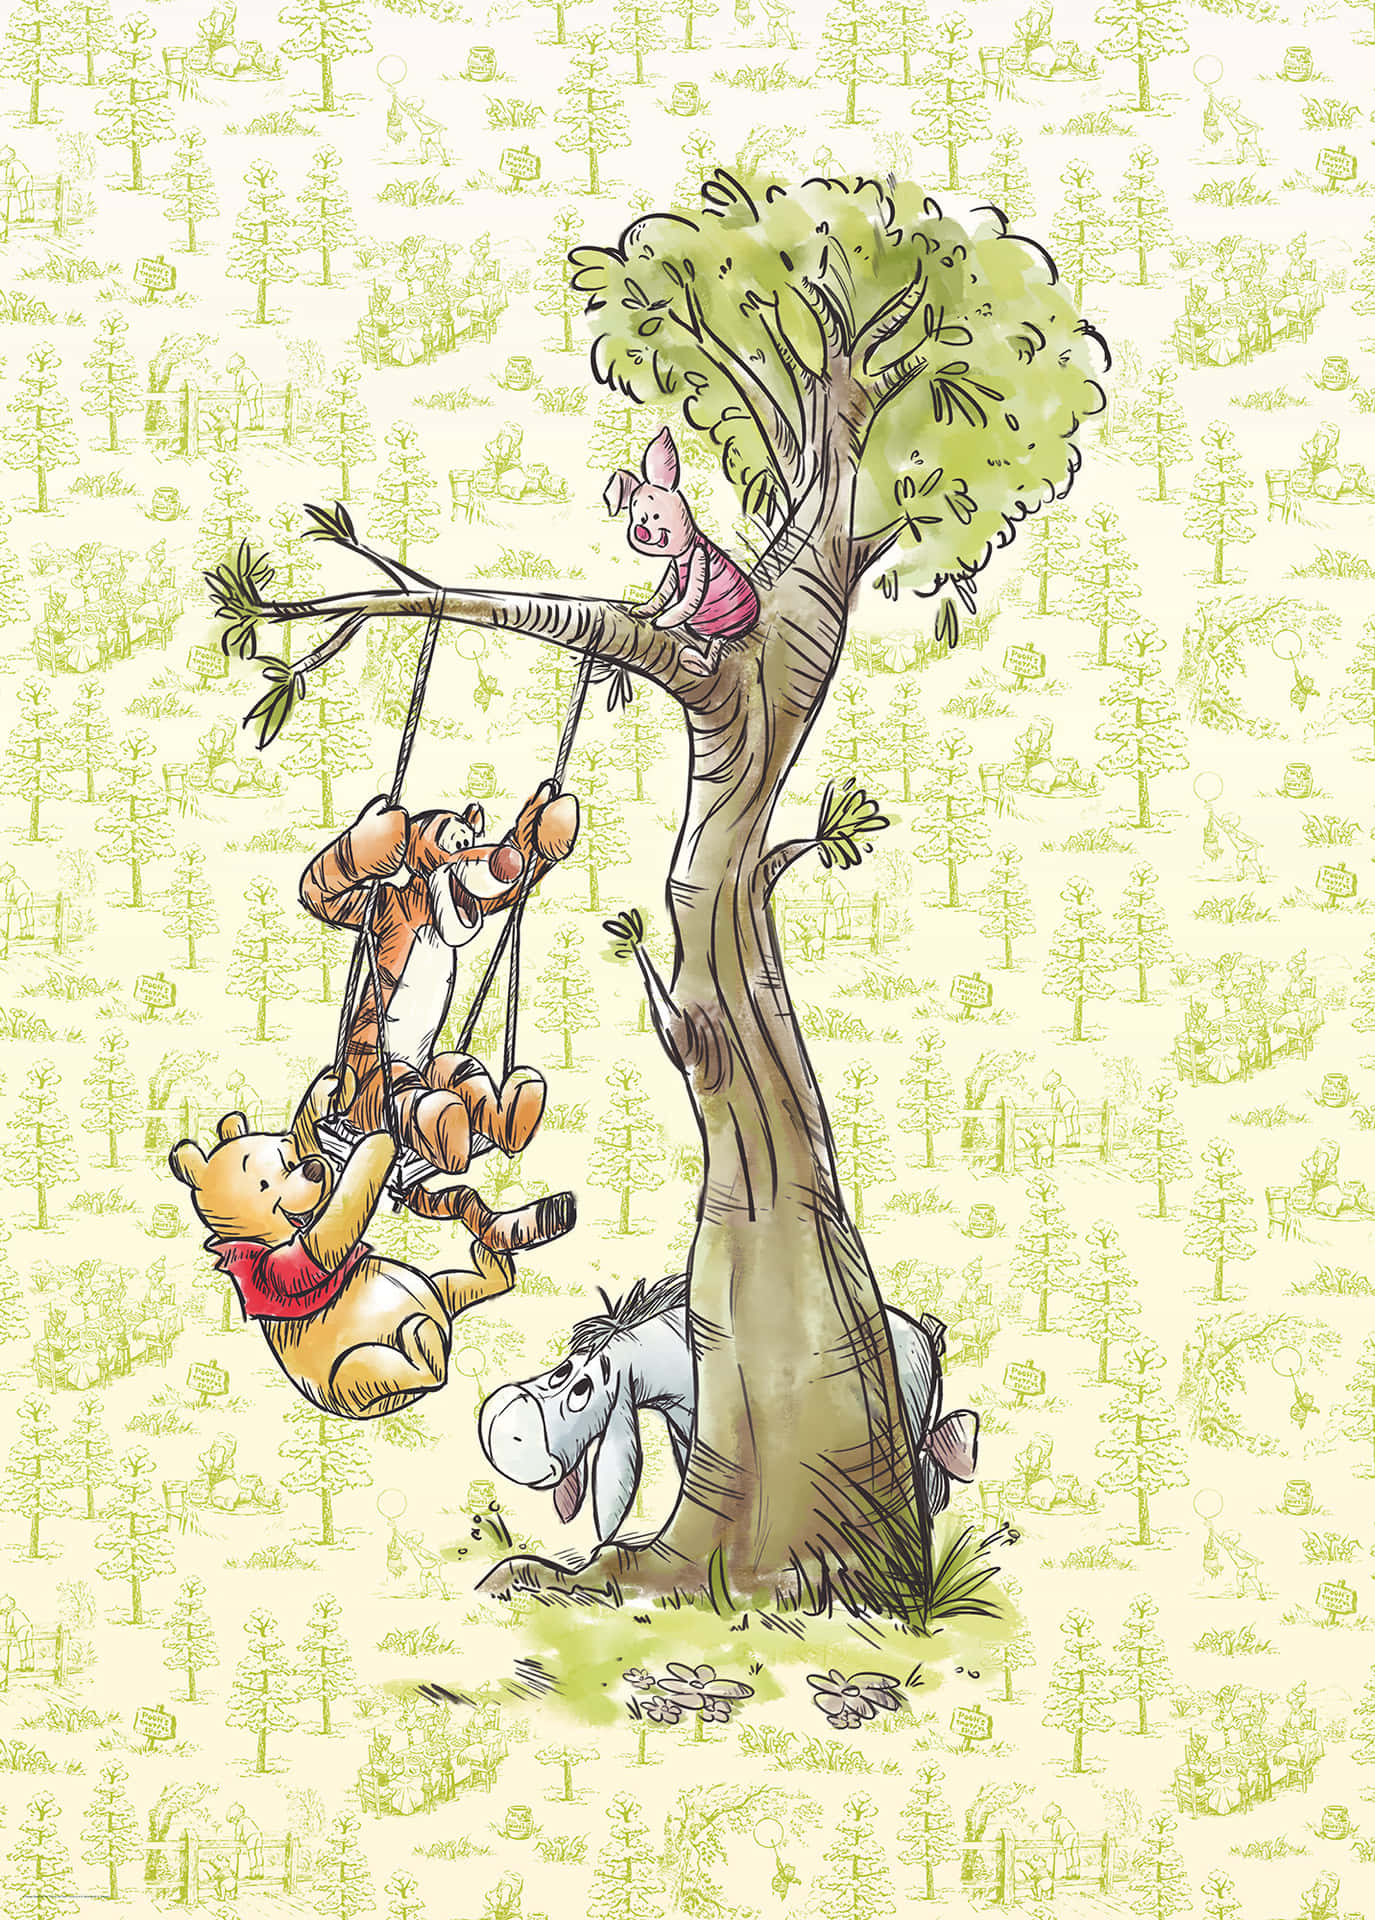 Charming Illustration Of Winnie The Pooh And Friends In Hundred Acre Wood